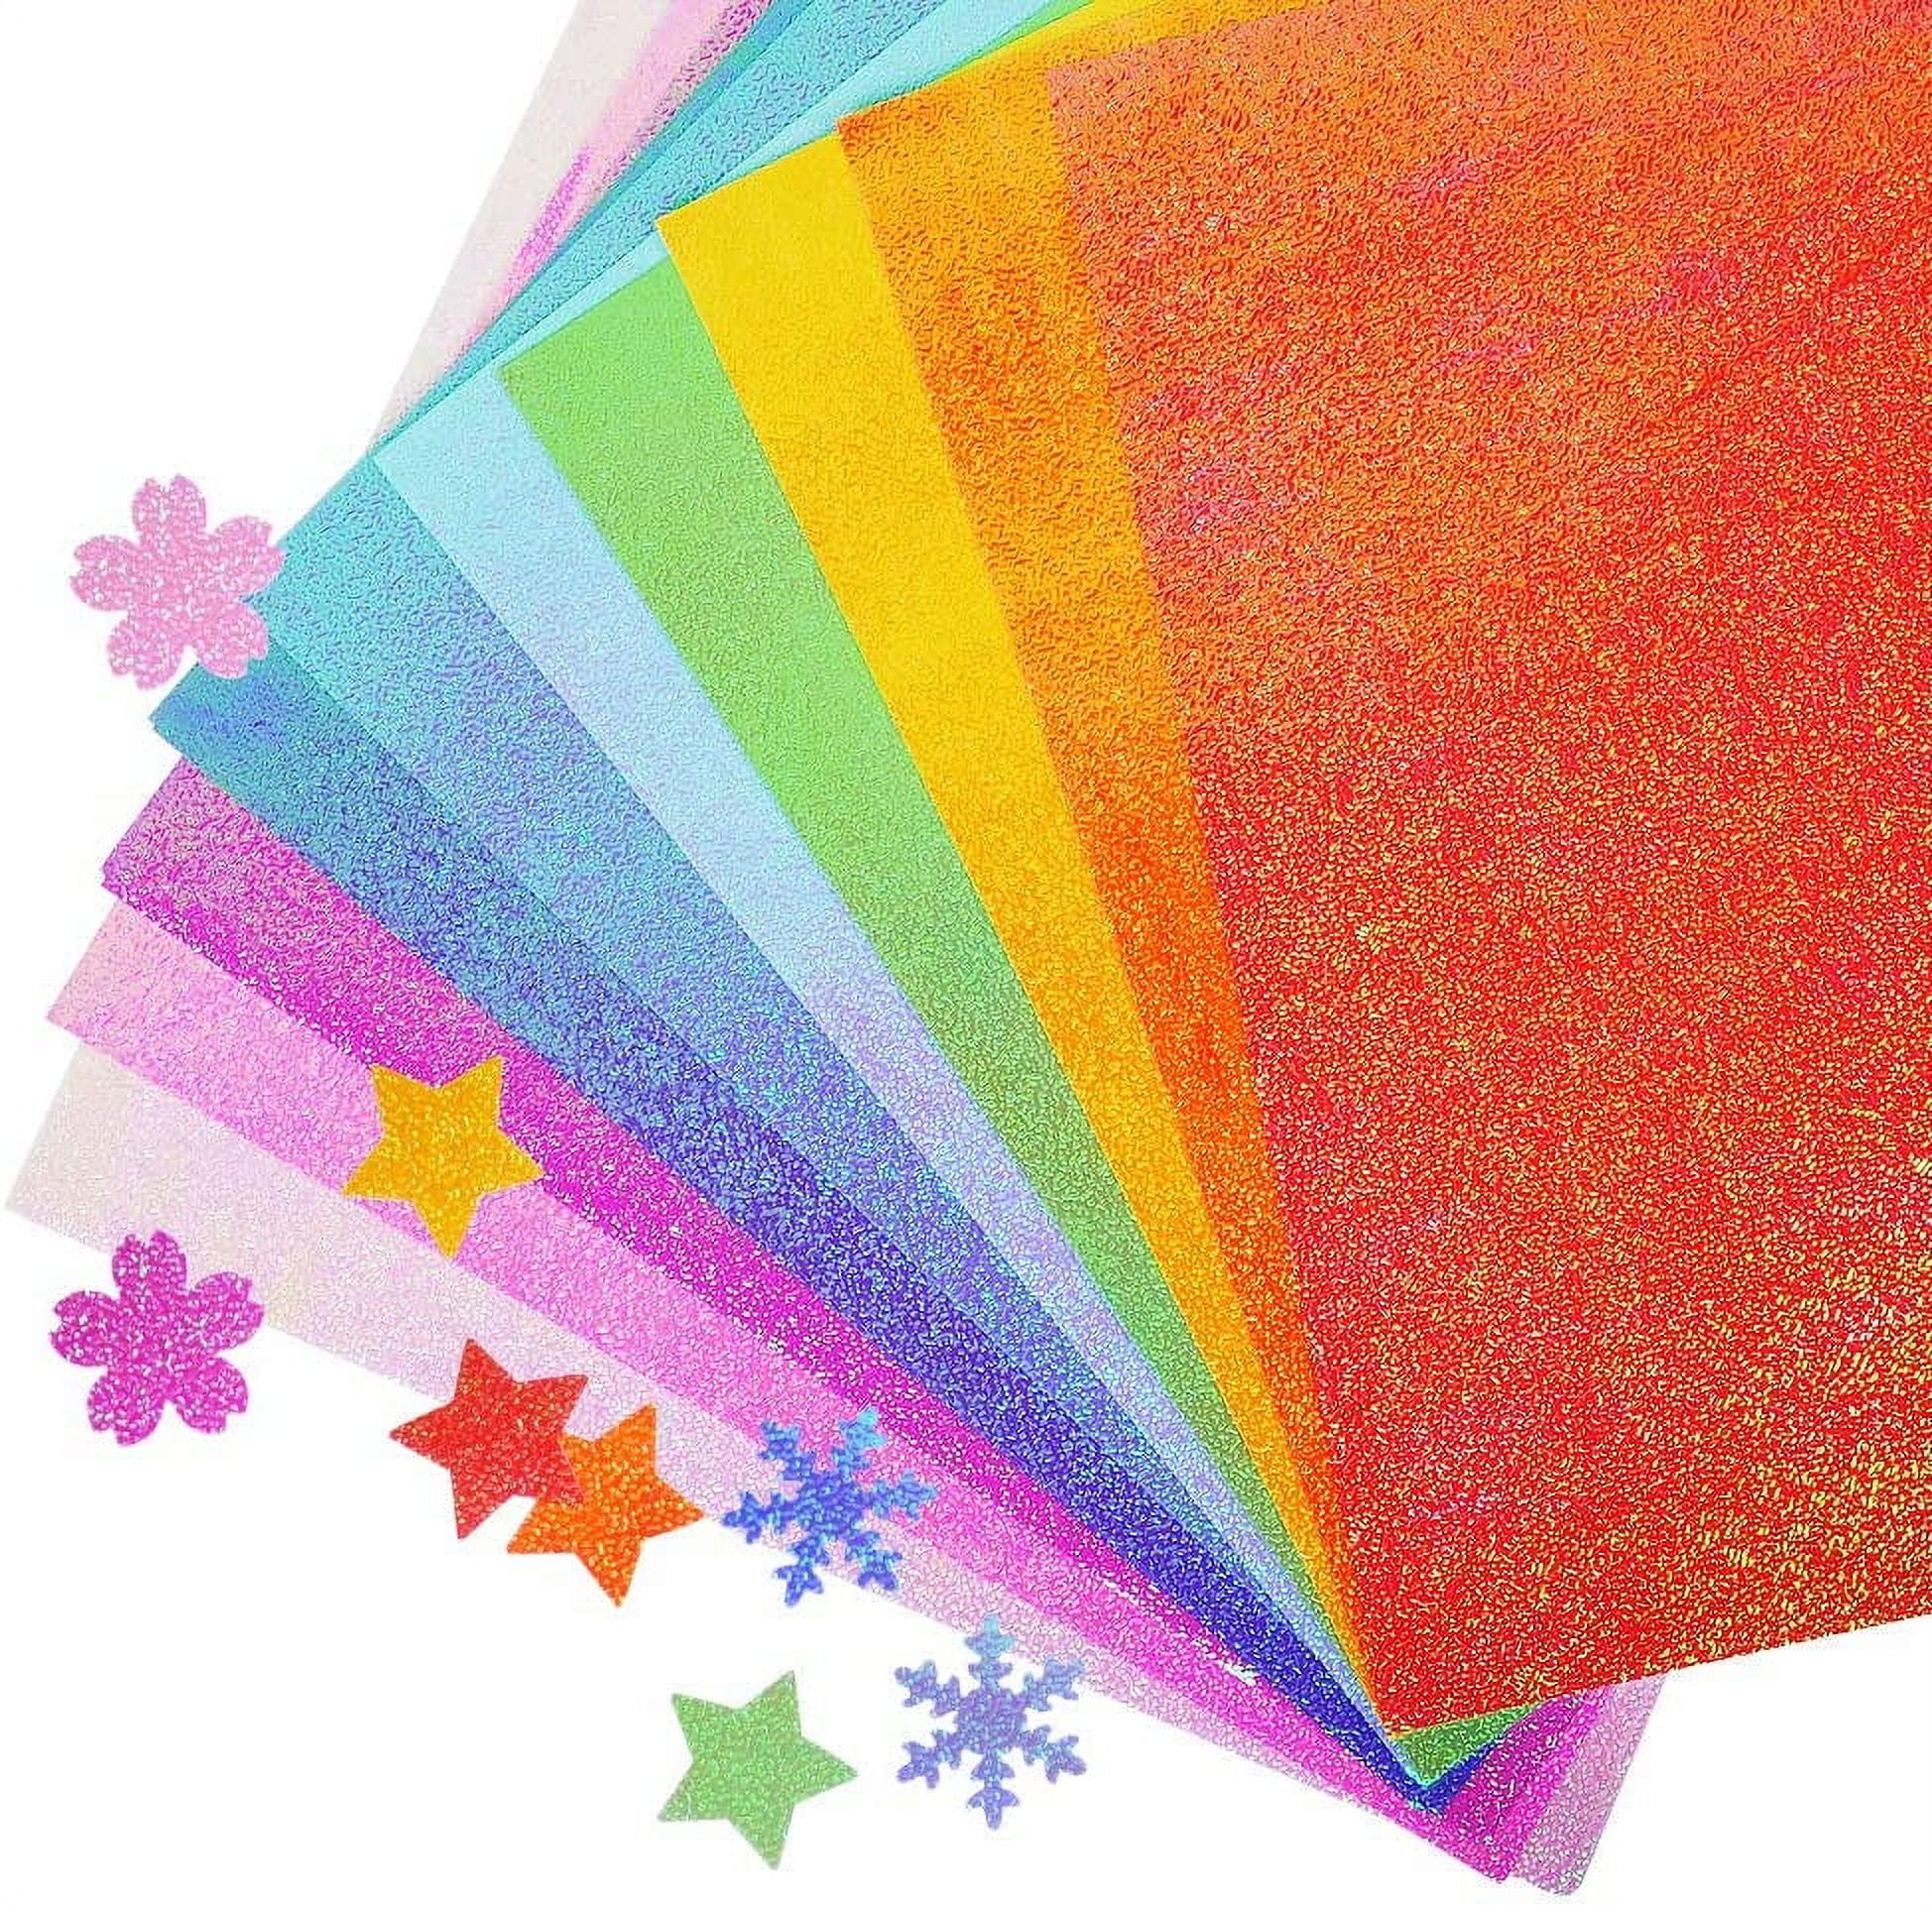 50 Sheets Mixed Colors Pearl Shiny Square Origami Papers Folded Craft Paper  - AliExpress